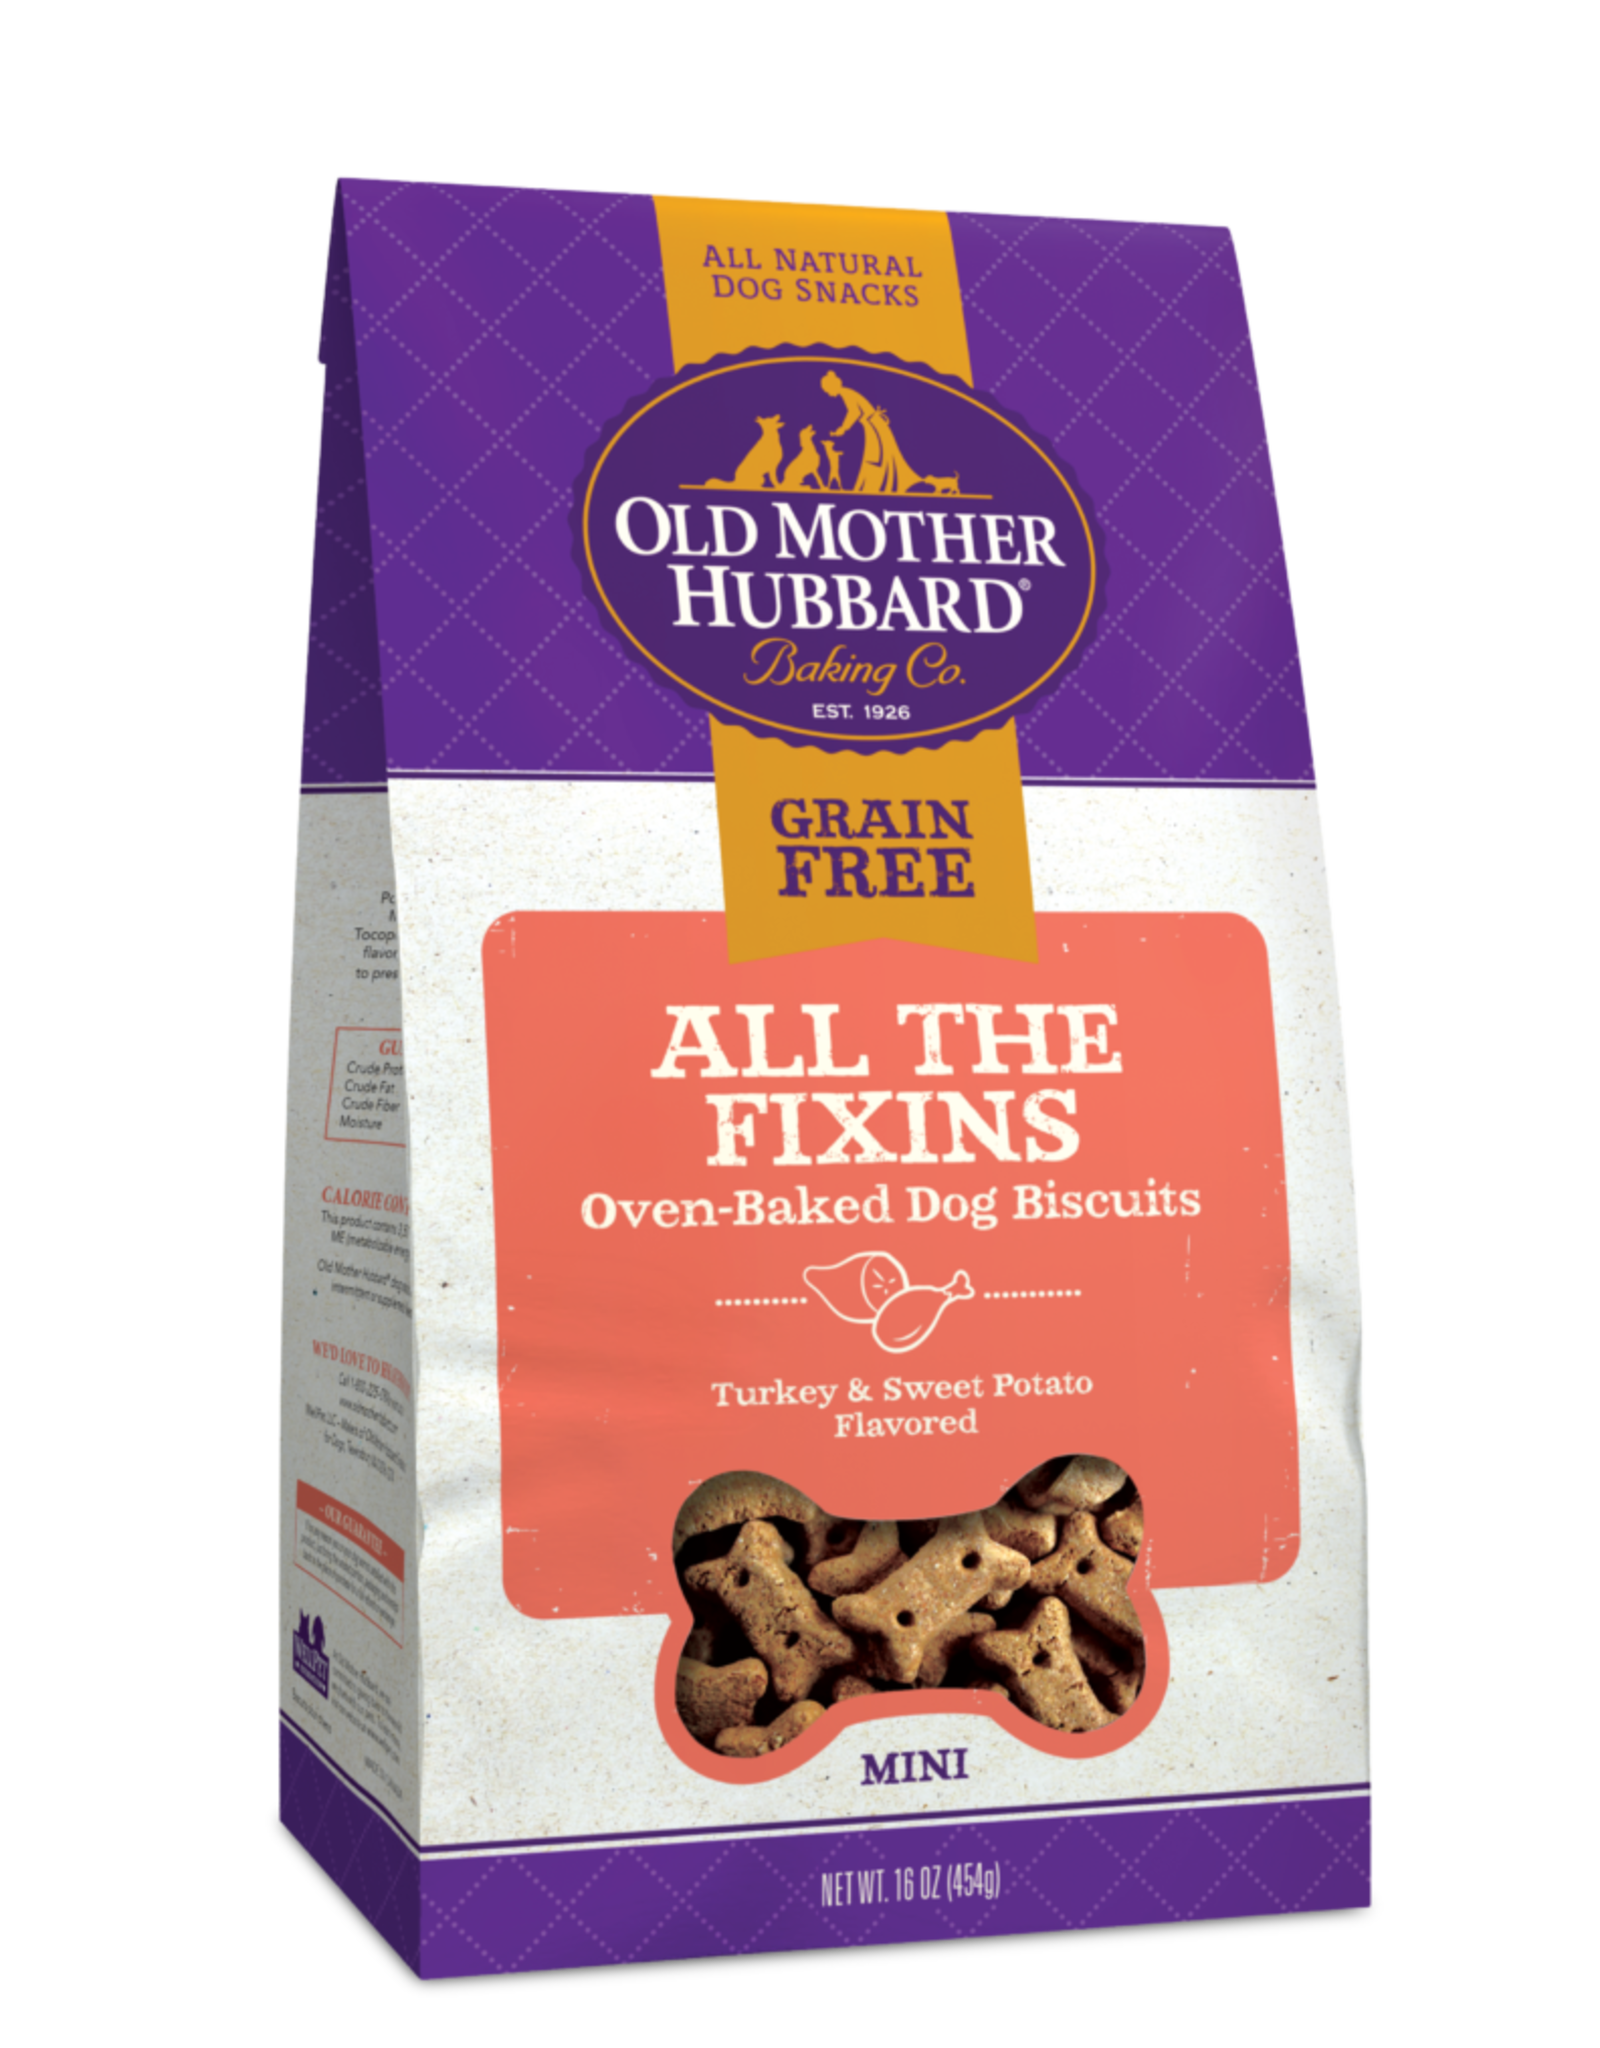 WELLPET LLC OLD MOTHER HUBBARD BISC ALL THE FIXINS MINI 16OZ